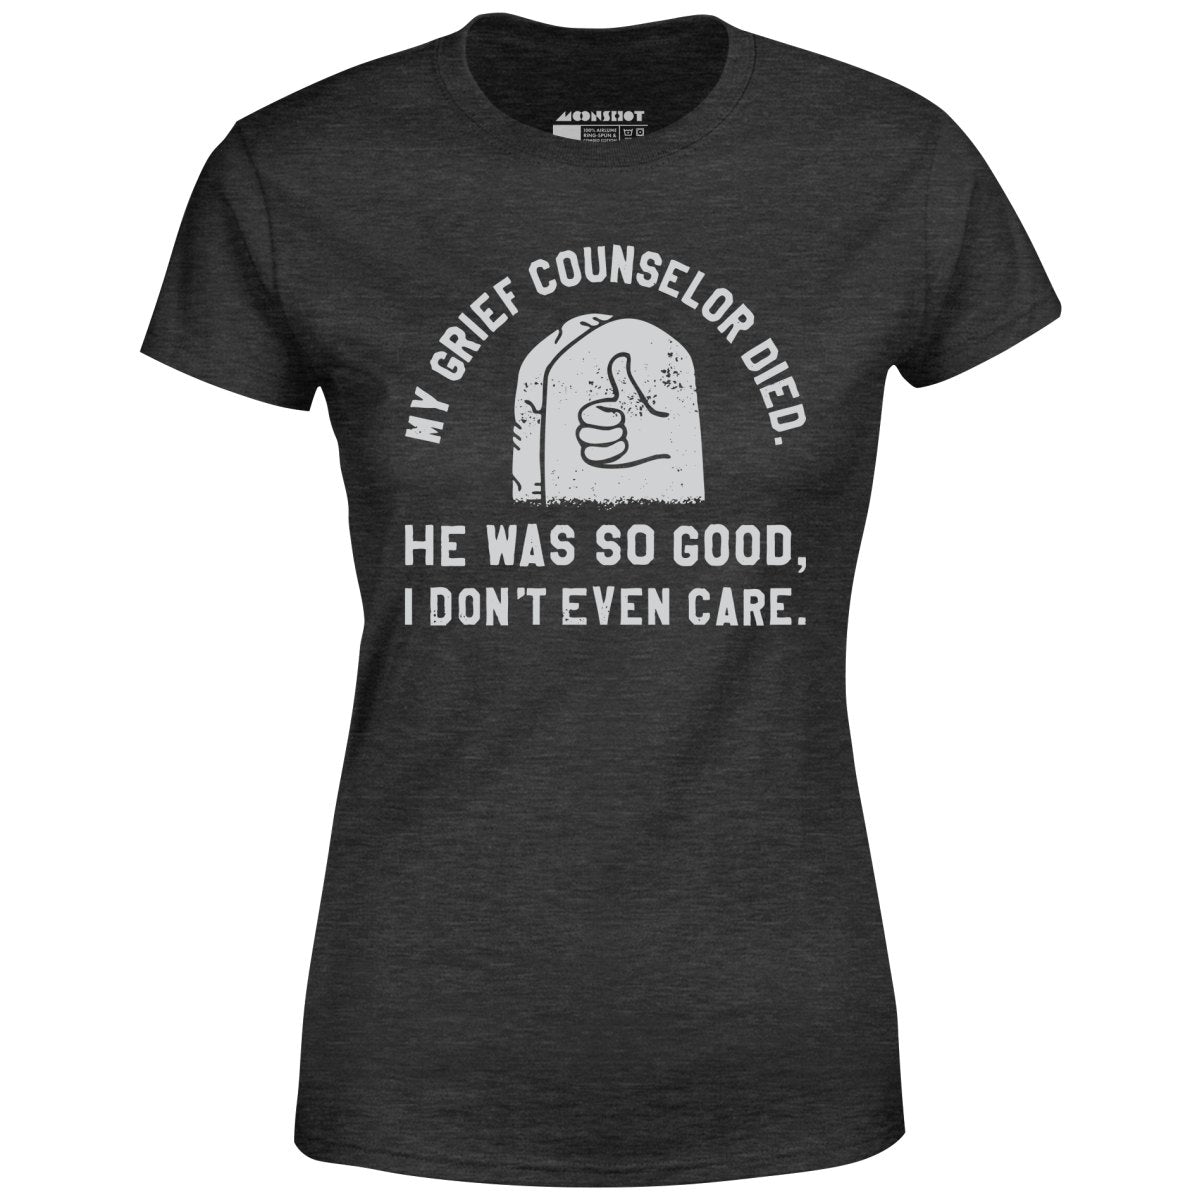 My Grief Counselor Died - Women's T-Shirt